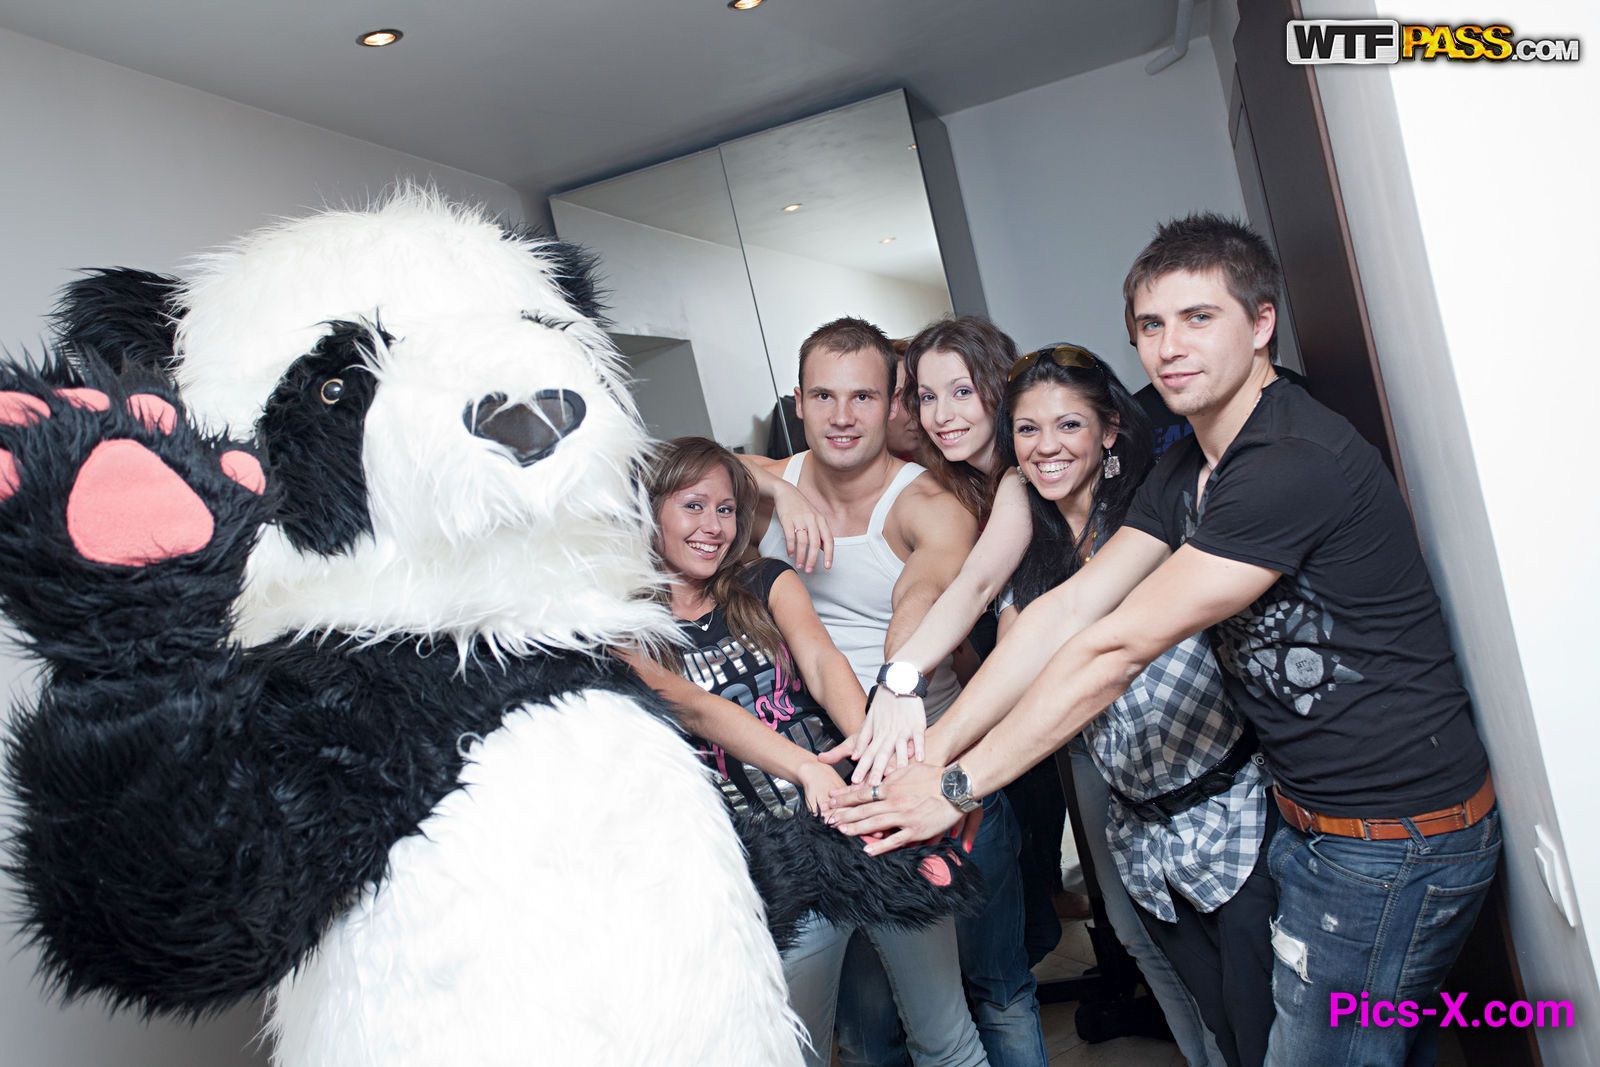 Real college sex party with a Panda-boy, part 4 - College Fuck Parties - Image 7